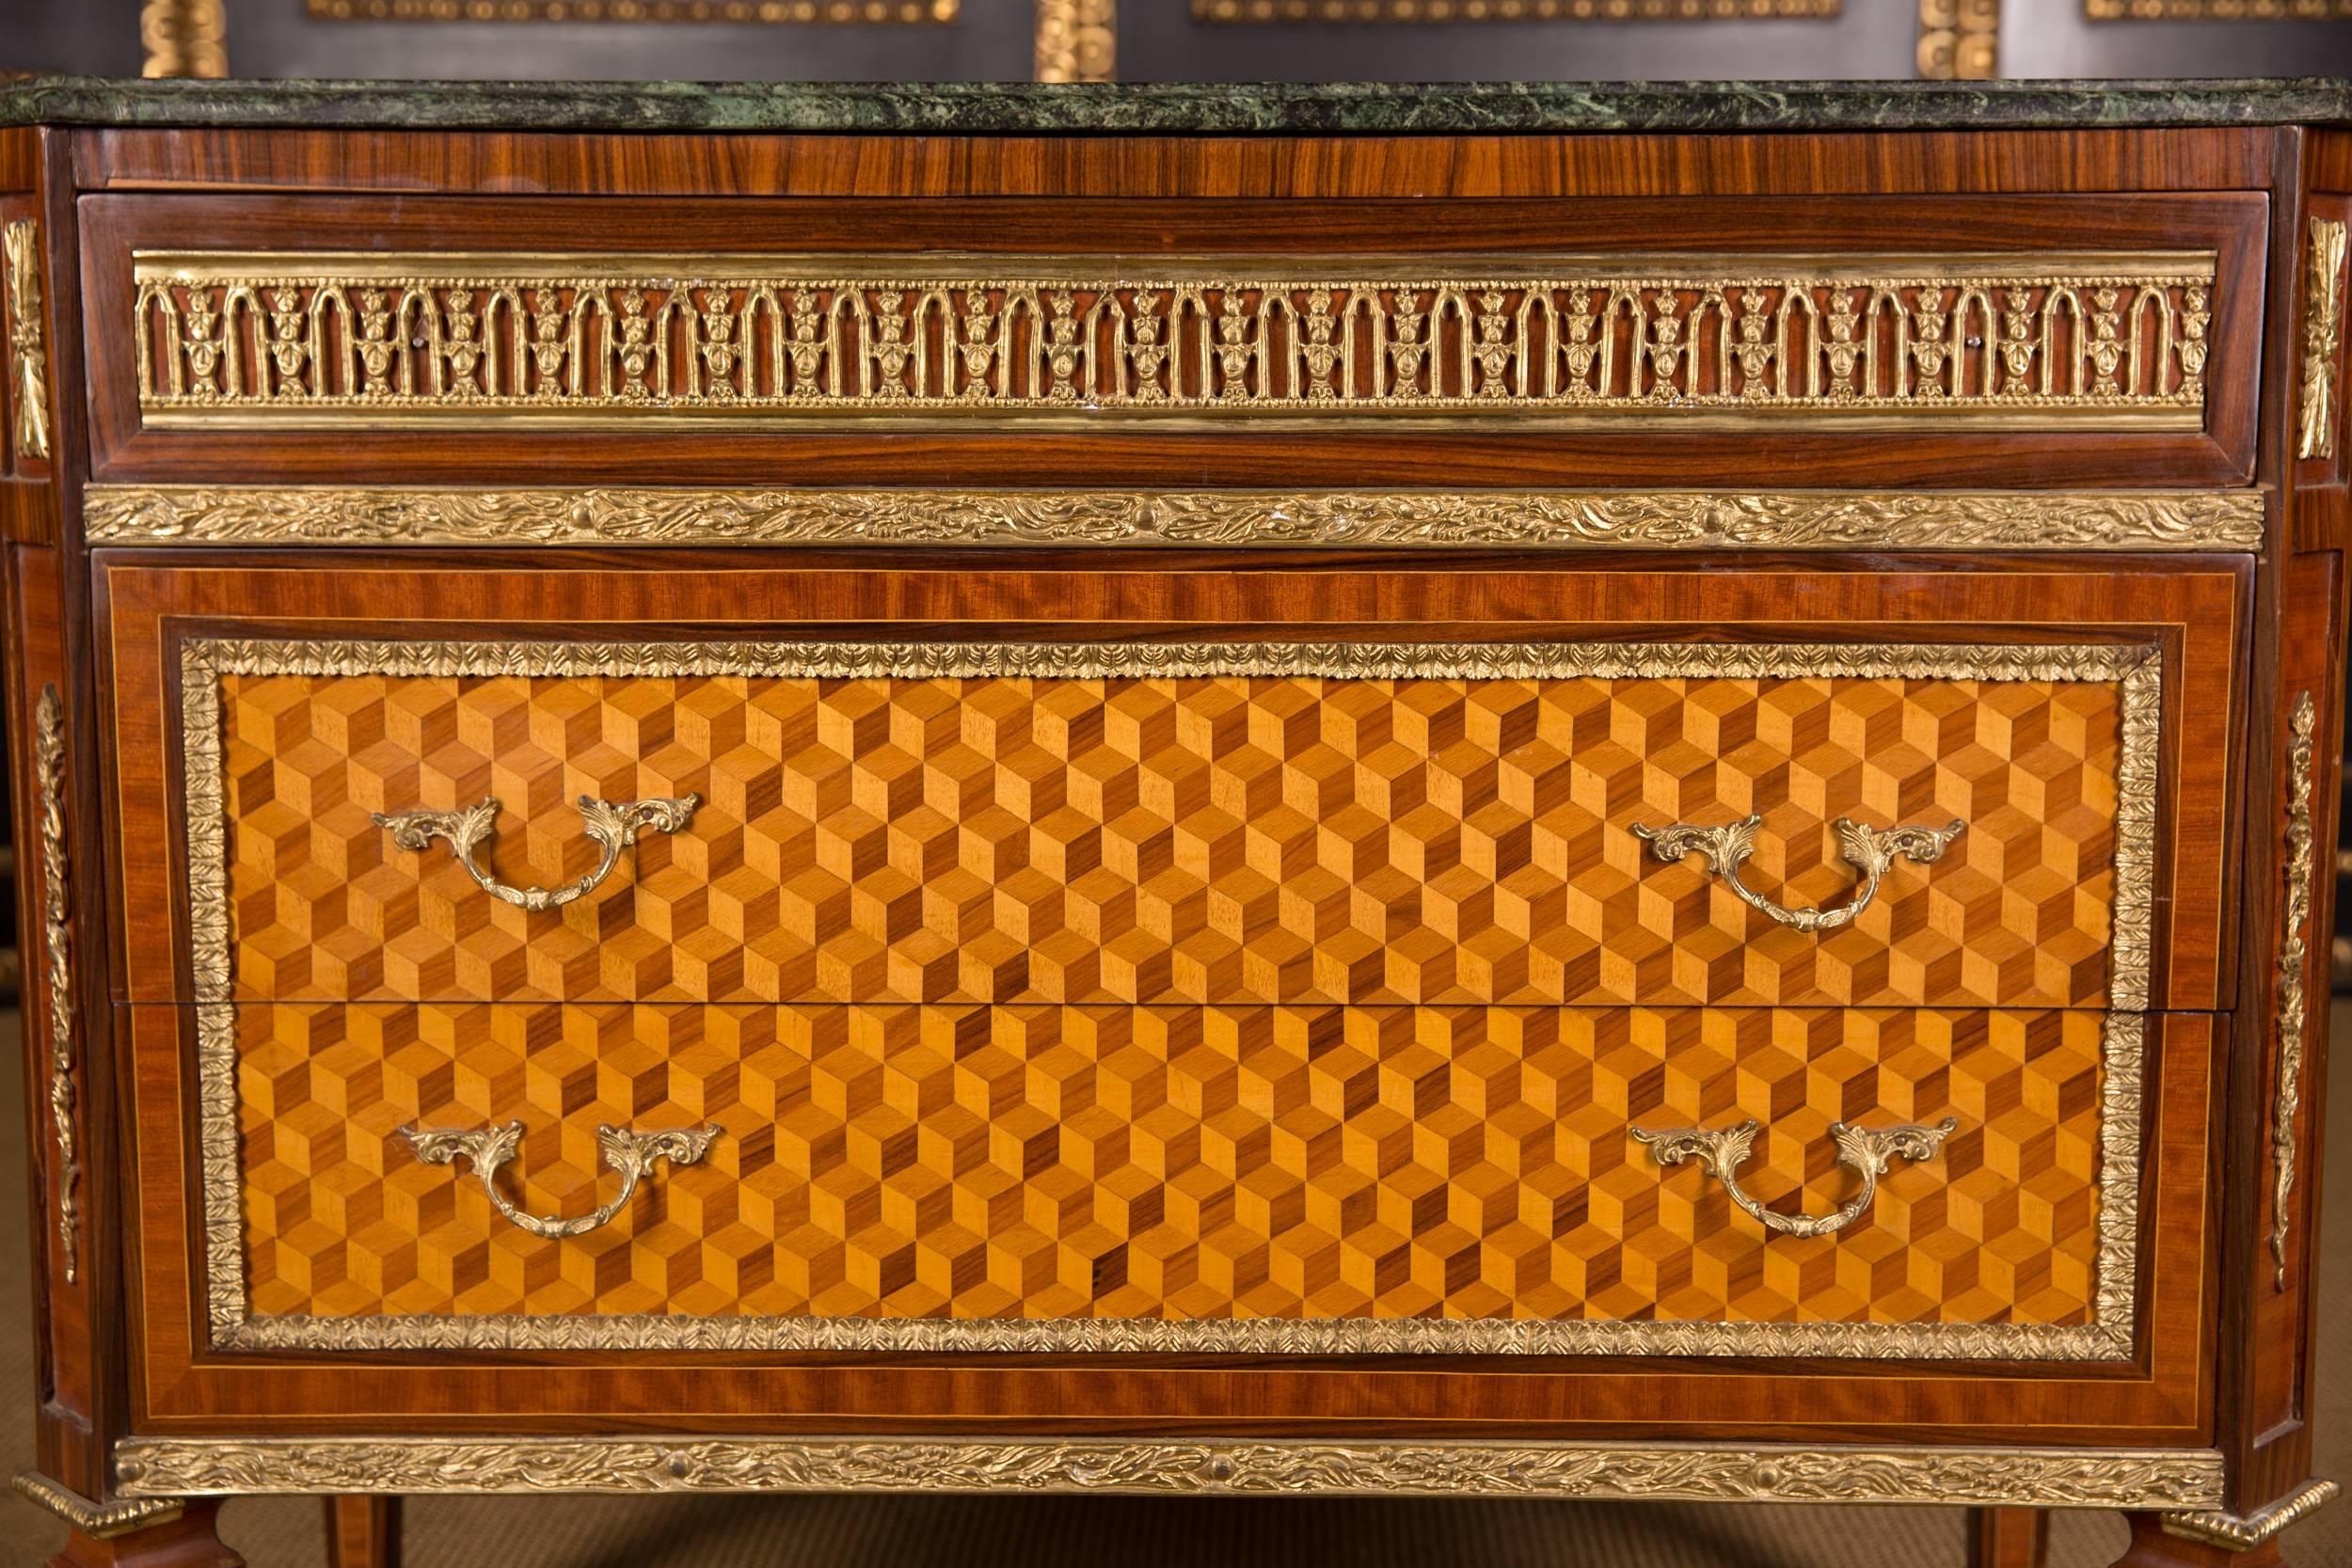 18th Century and Earlier Beautiful Elegant Chest of Drawers with Marble Top in Louis Seize Style